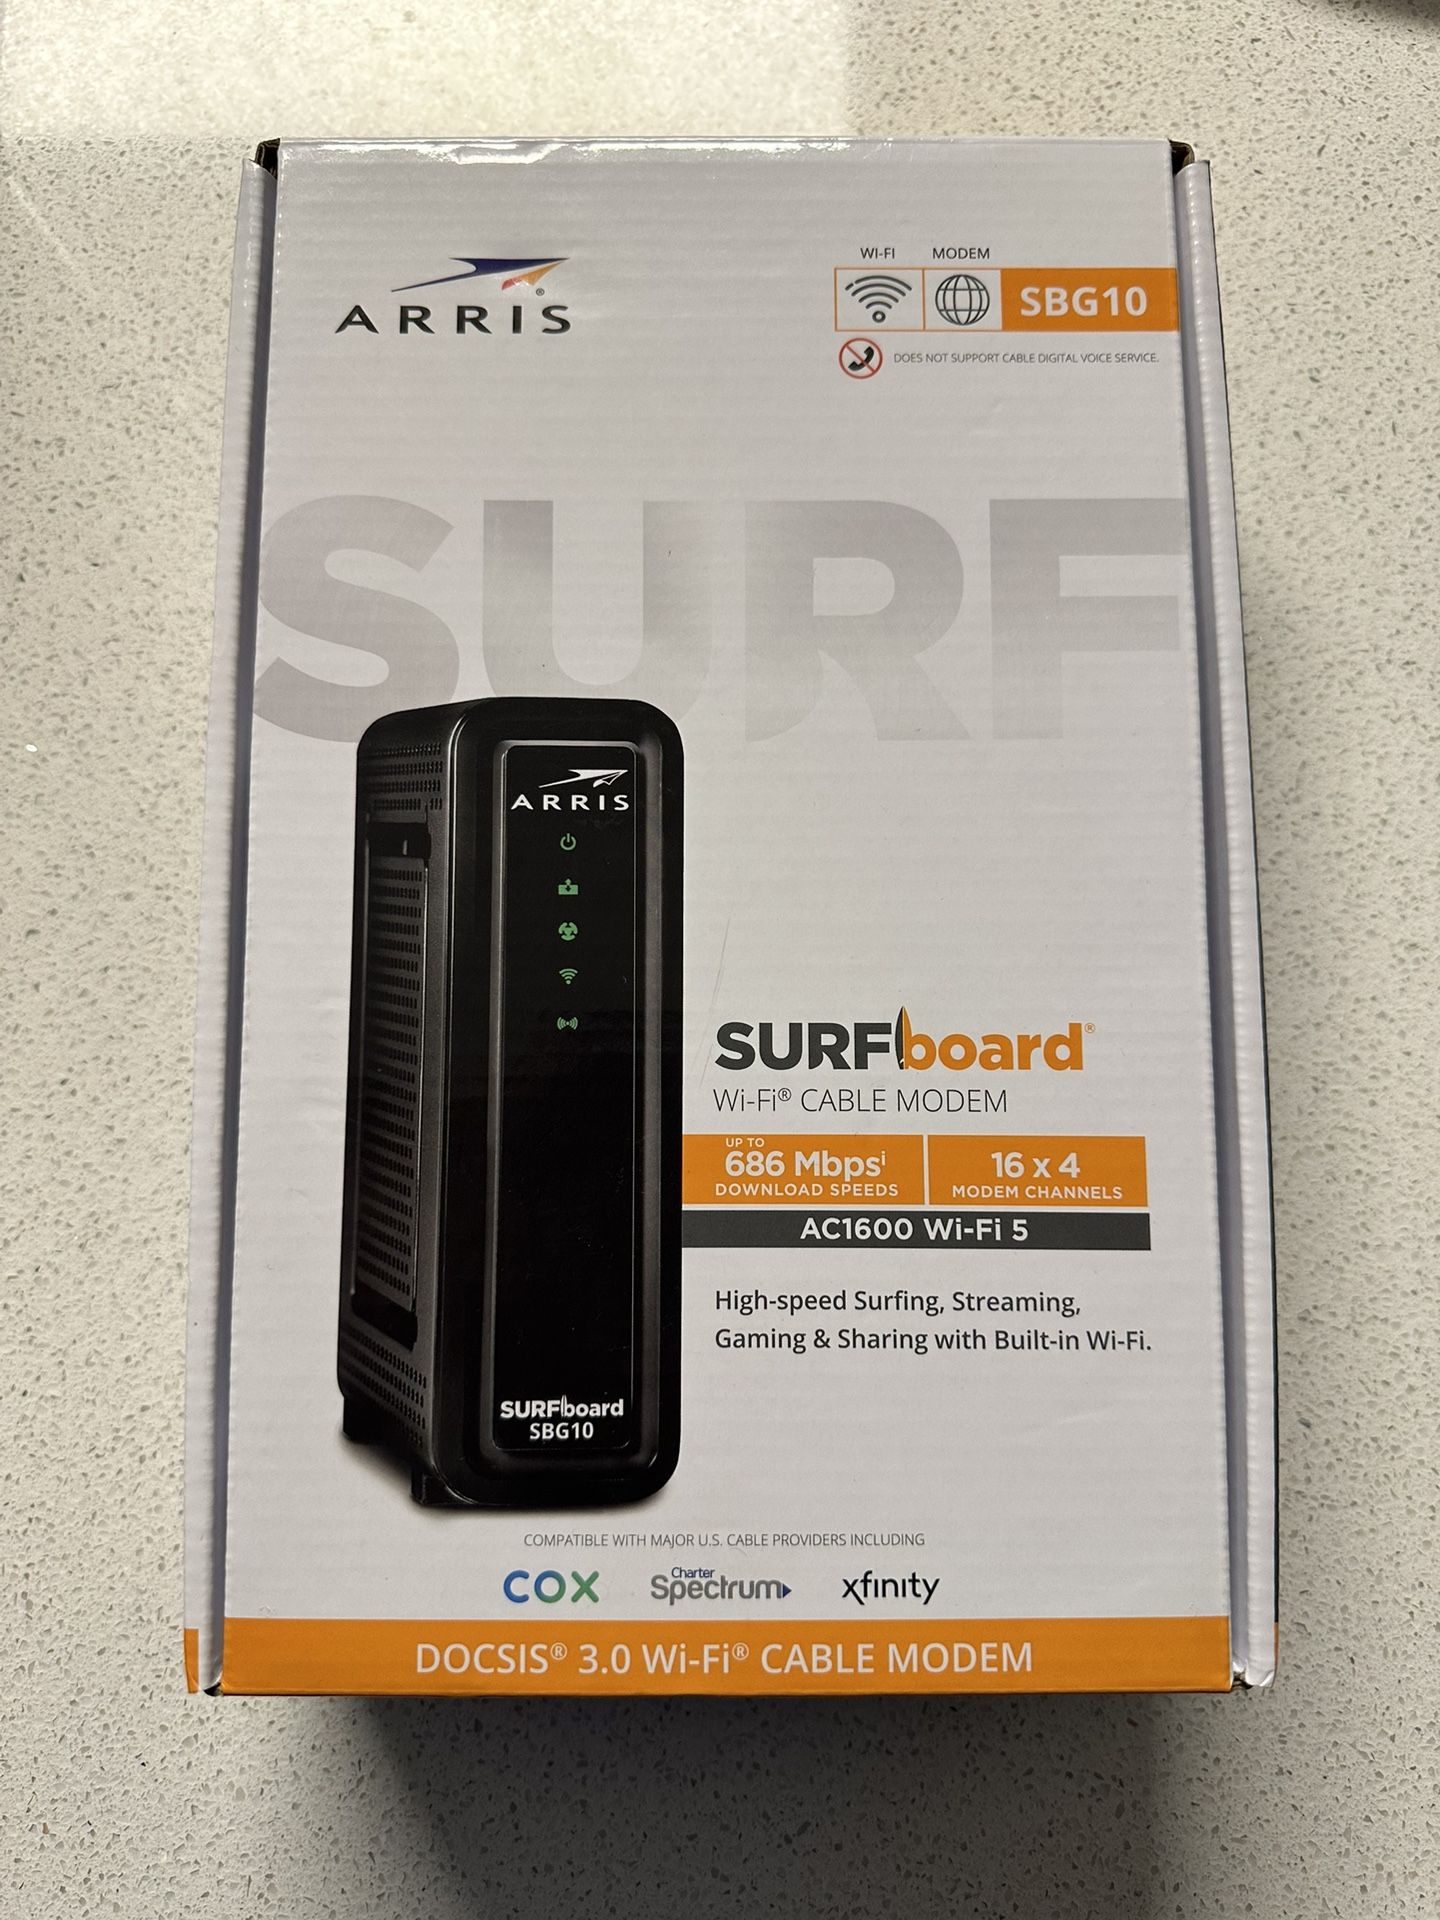 Brand New ARRIS Surfboard 16x4 DOCSIS 3.0 Cable Modem & AC1600 Dual-Band Wi-Fi Router, Wireless Technology - New Condition